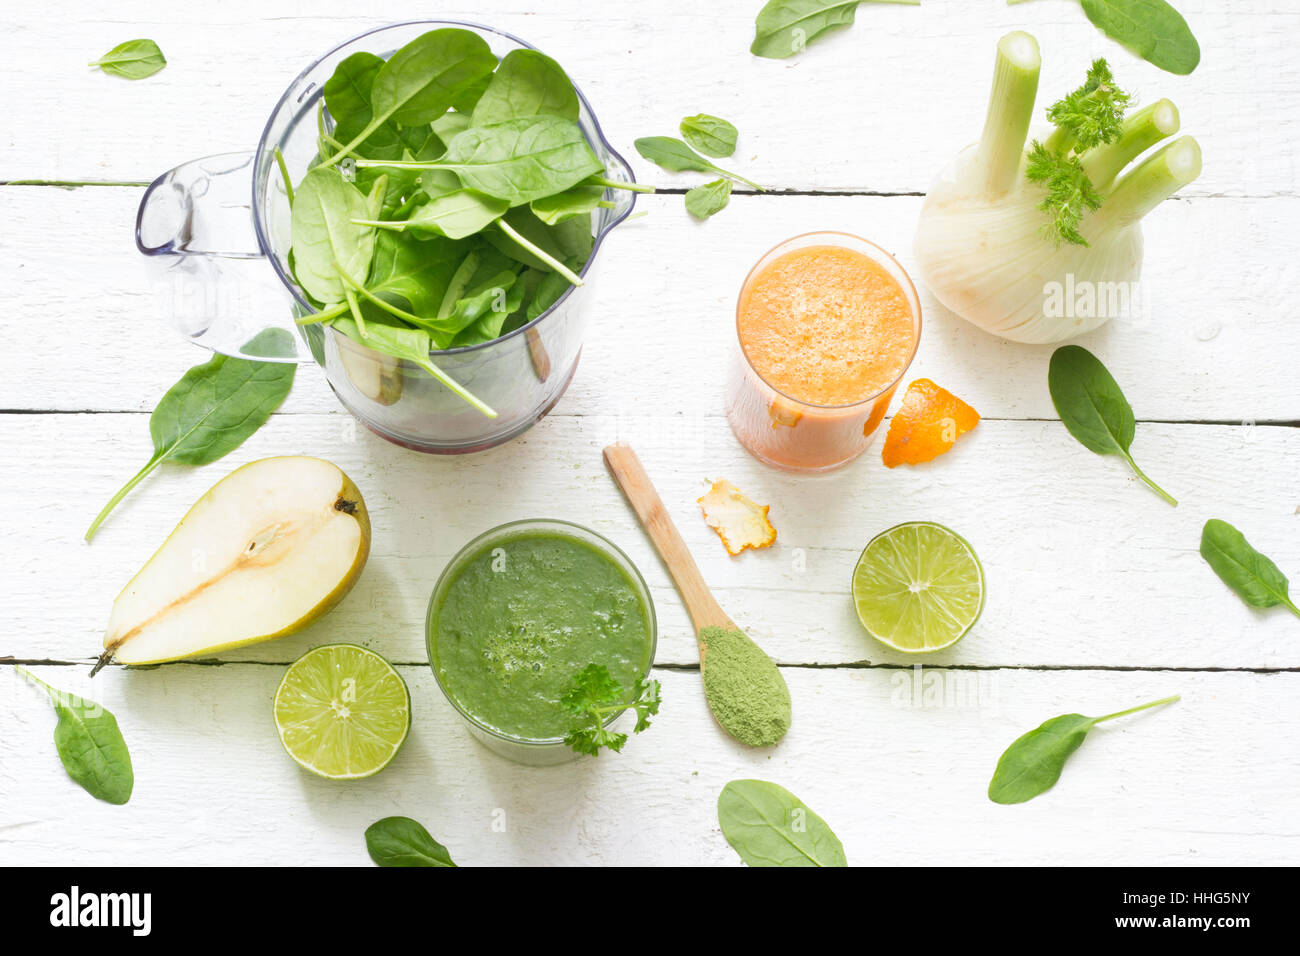 Fruits, vegetables, smoothie, blender, abstract health diet lifestyle concept Stock Photo